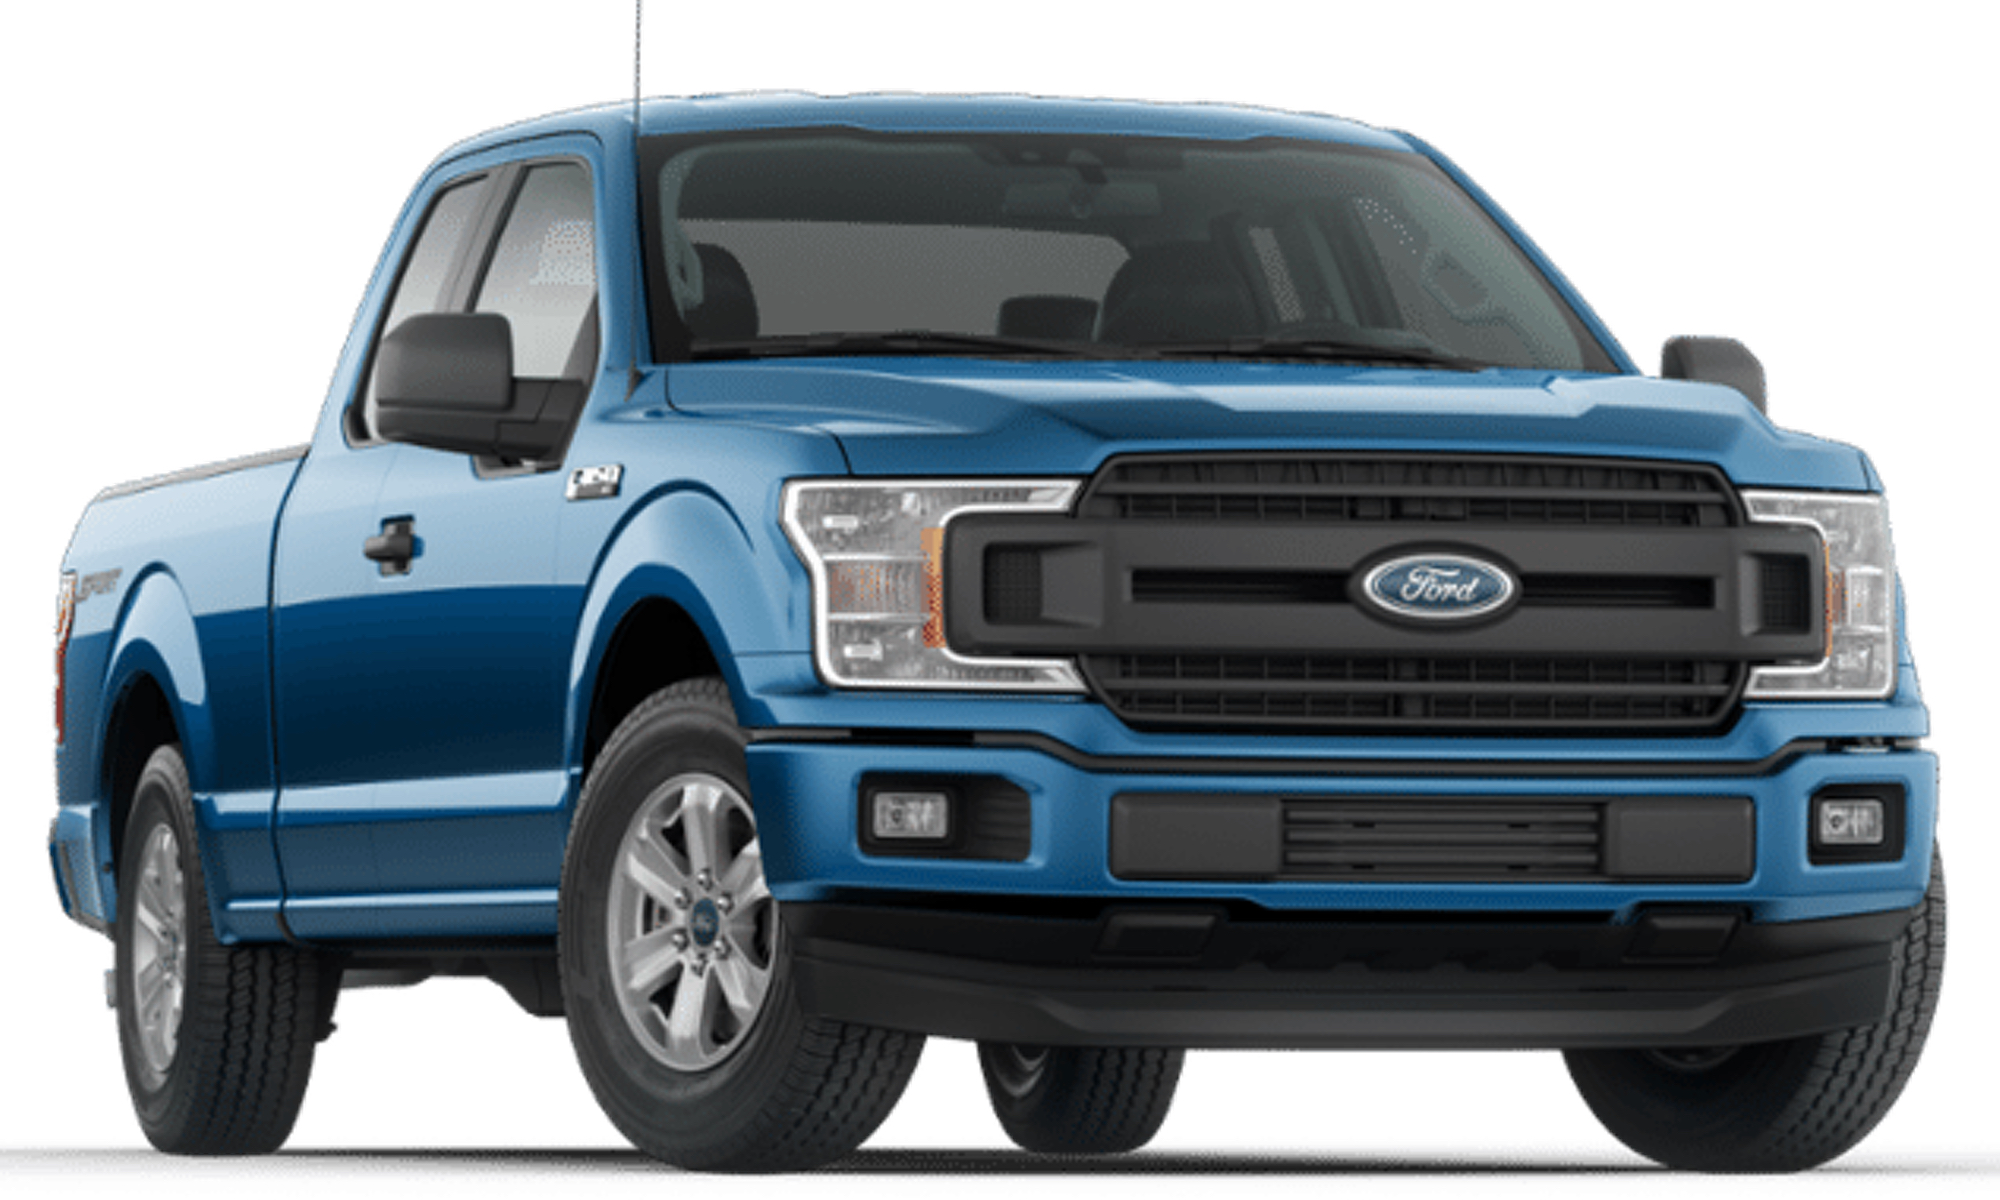 New Velocity Blue Color For The 2019 Ford F 150